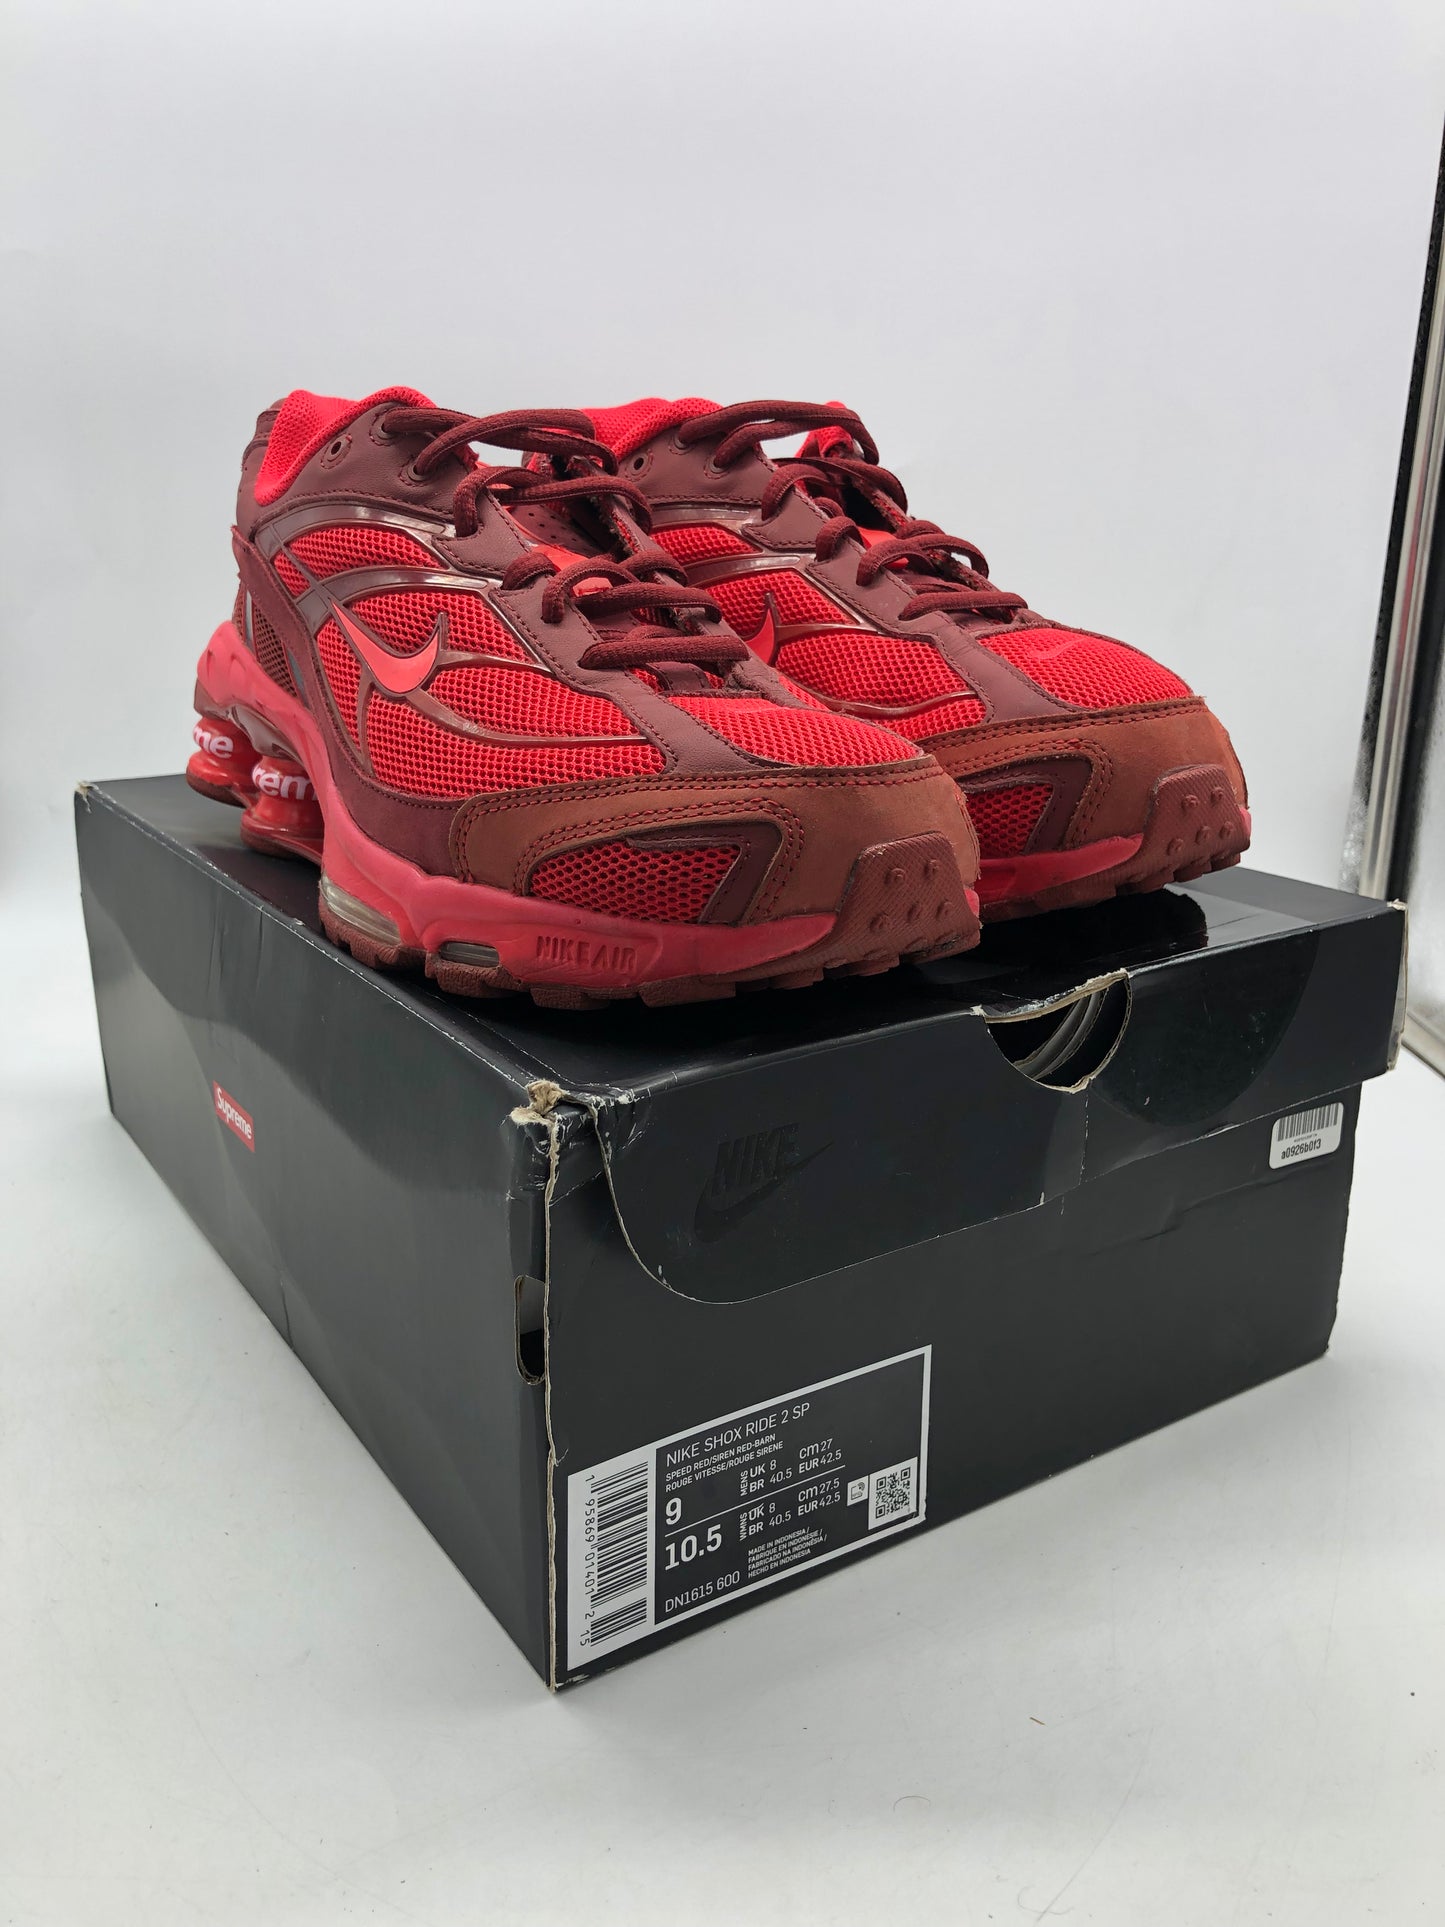 Preowned Nike Supreme Shox Ride 2 Red SP Sz 9M/10.5W